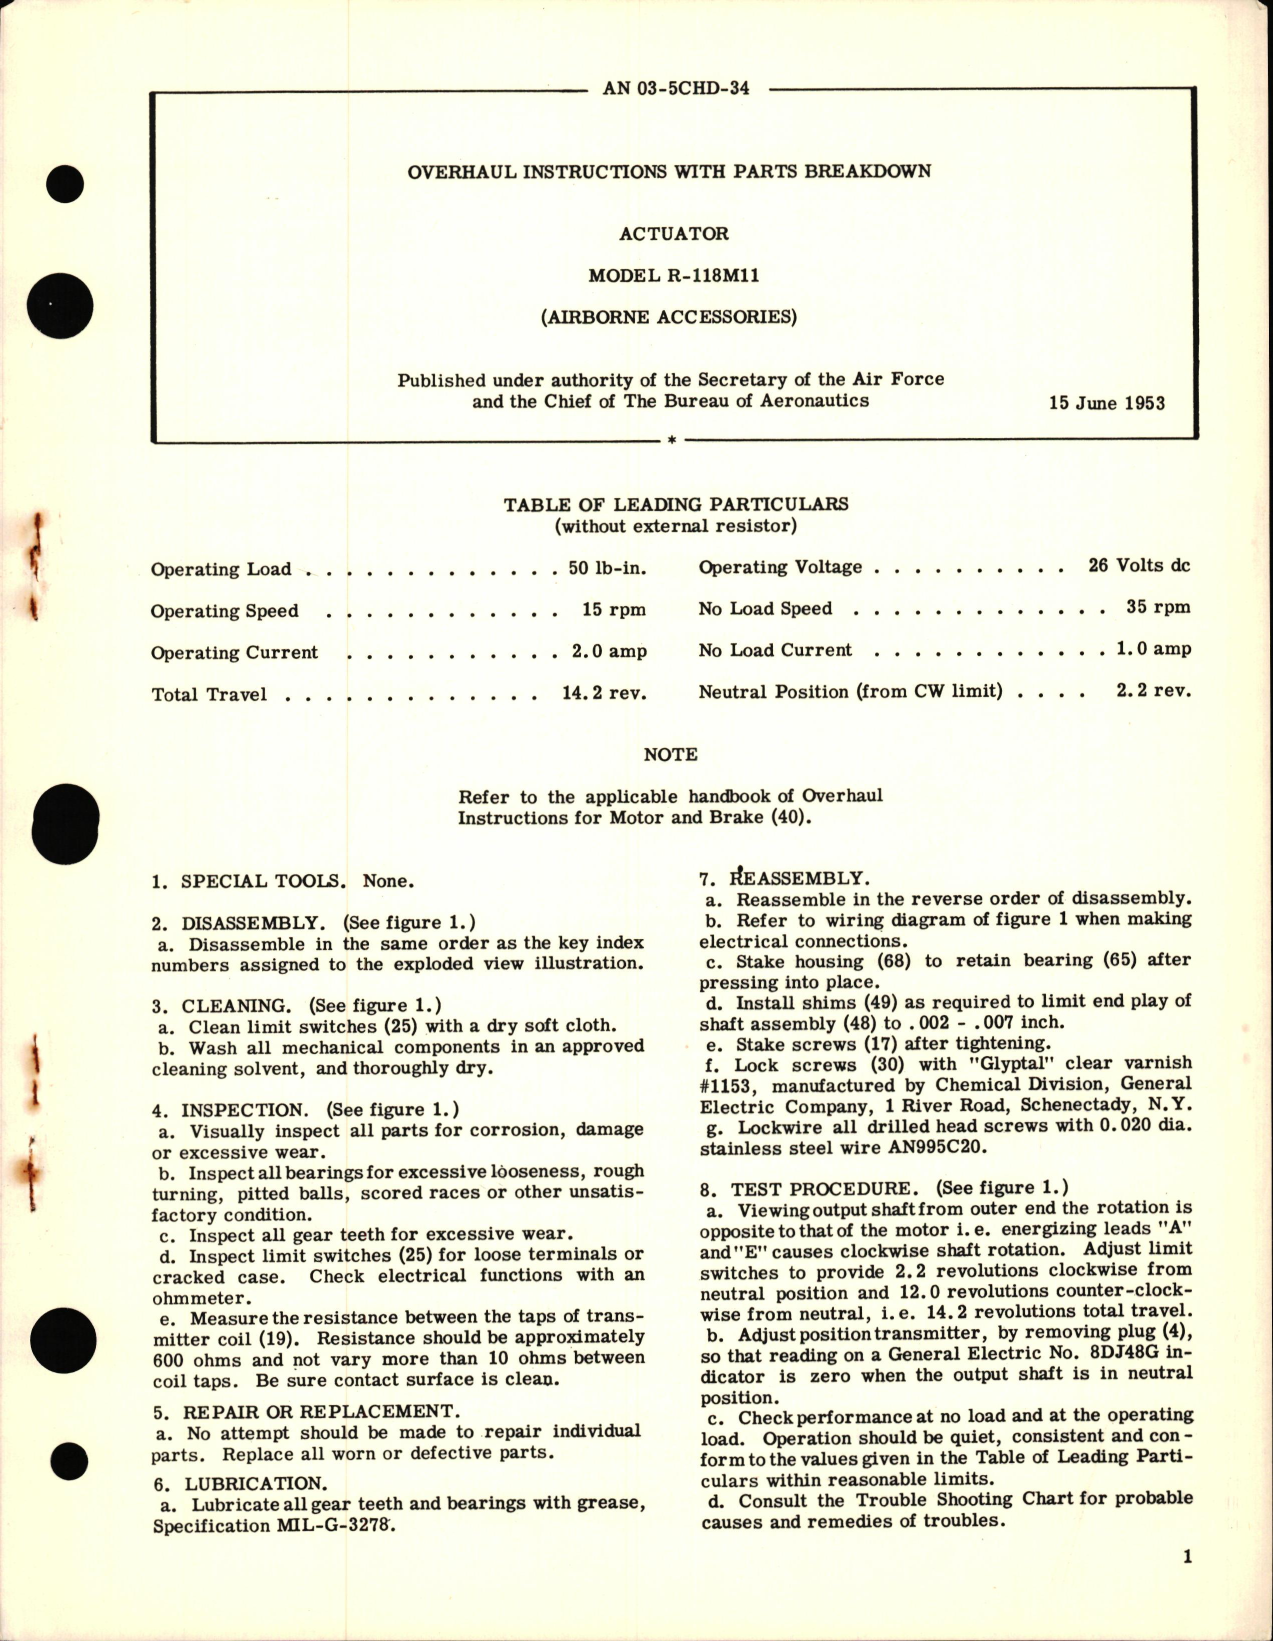 Sample page 1 from AirCorps Library document: Overhaul Instructions with Parts Breakdown for Actuator Model R-118M11